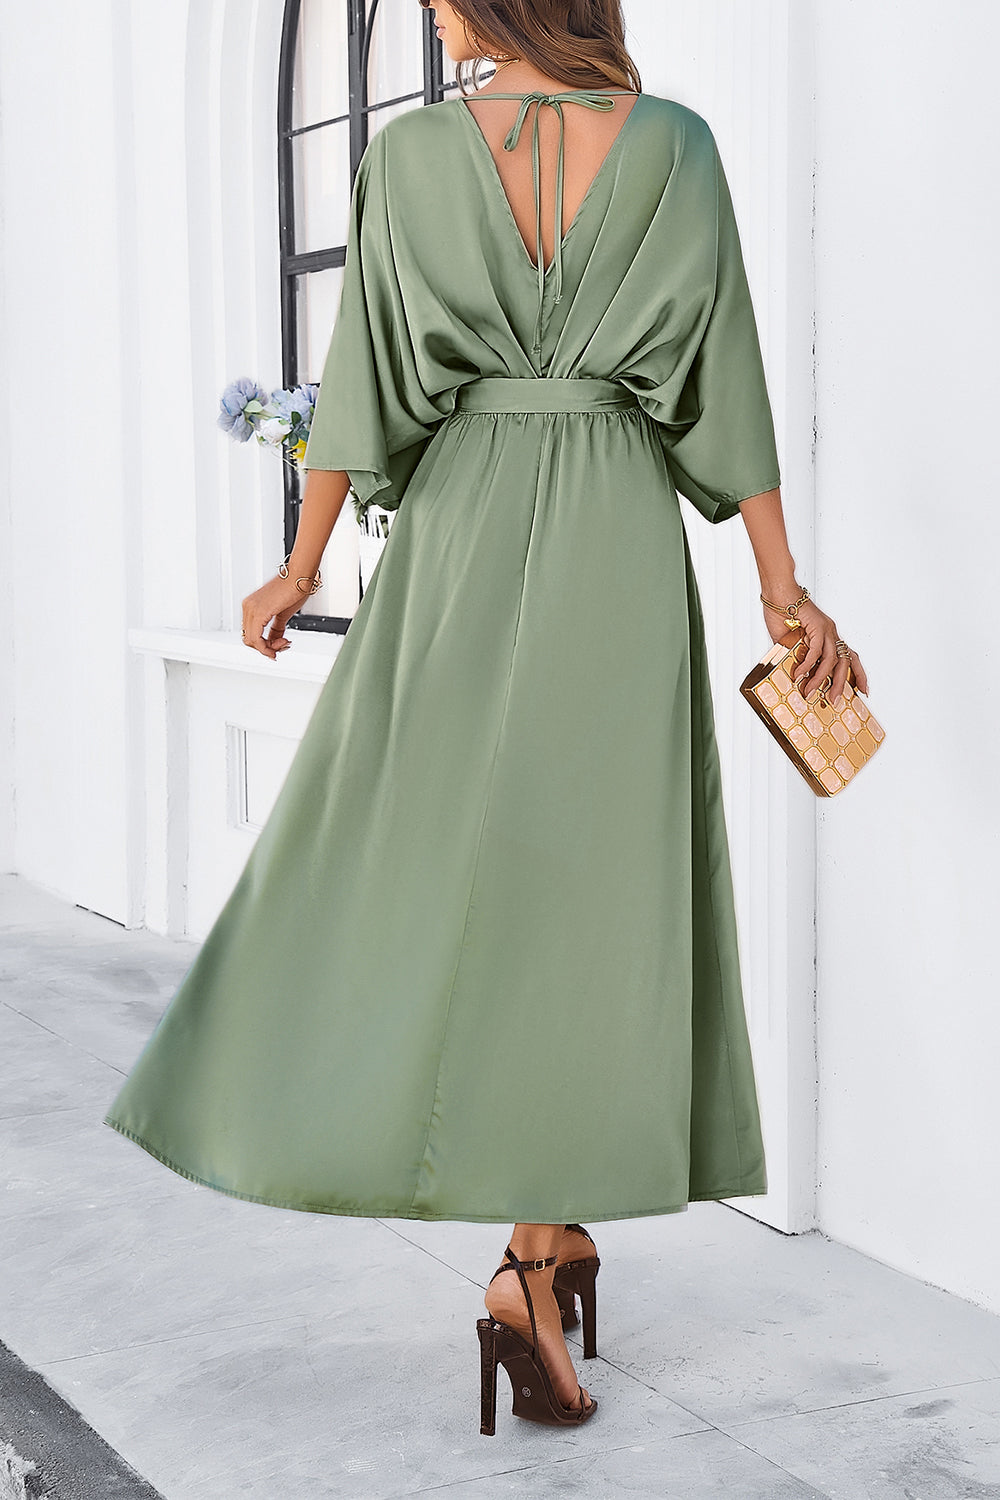 Elegant Summer Beach Wedding Guest Dress for Women Over 50: Slit Tied V-Neck with Three-Quarter Sleeves Party Dress